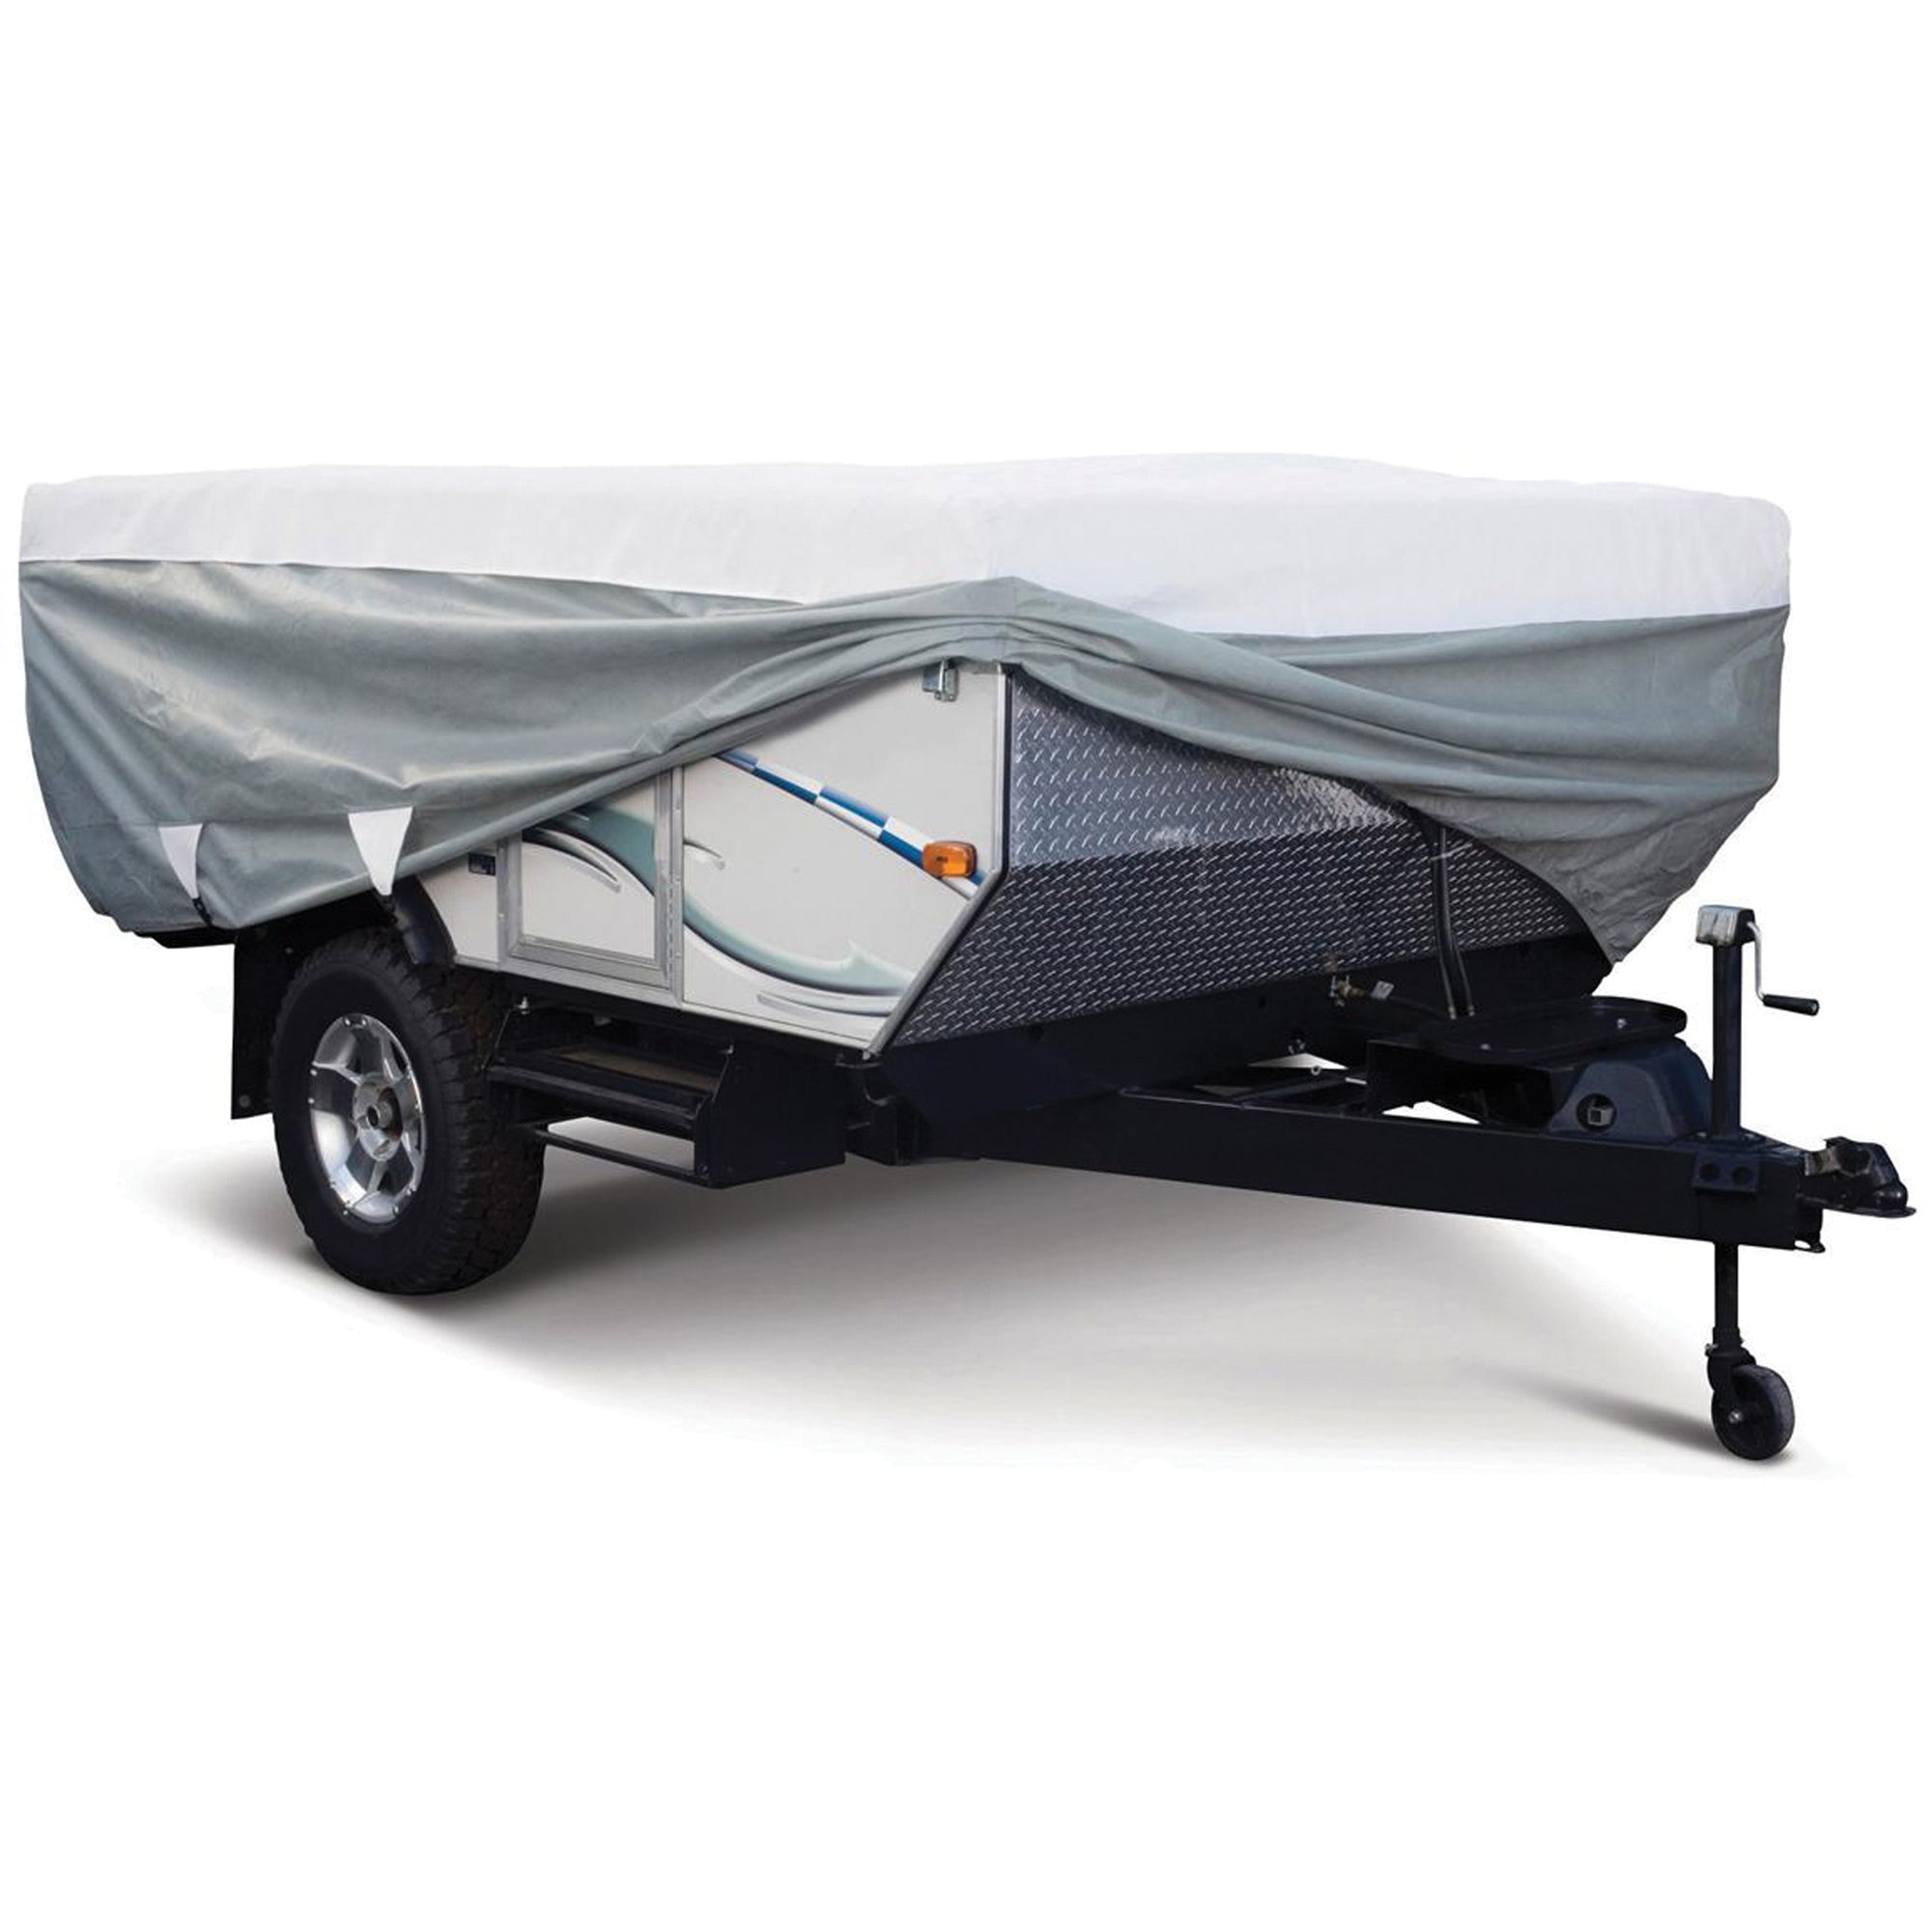 Classic Accessories 80-209 PolyPRO 3 Fold Down Camper Cover - 8'